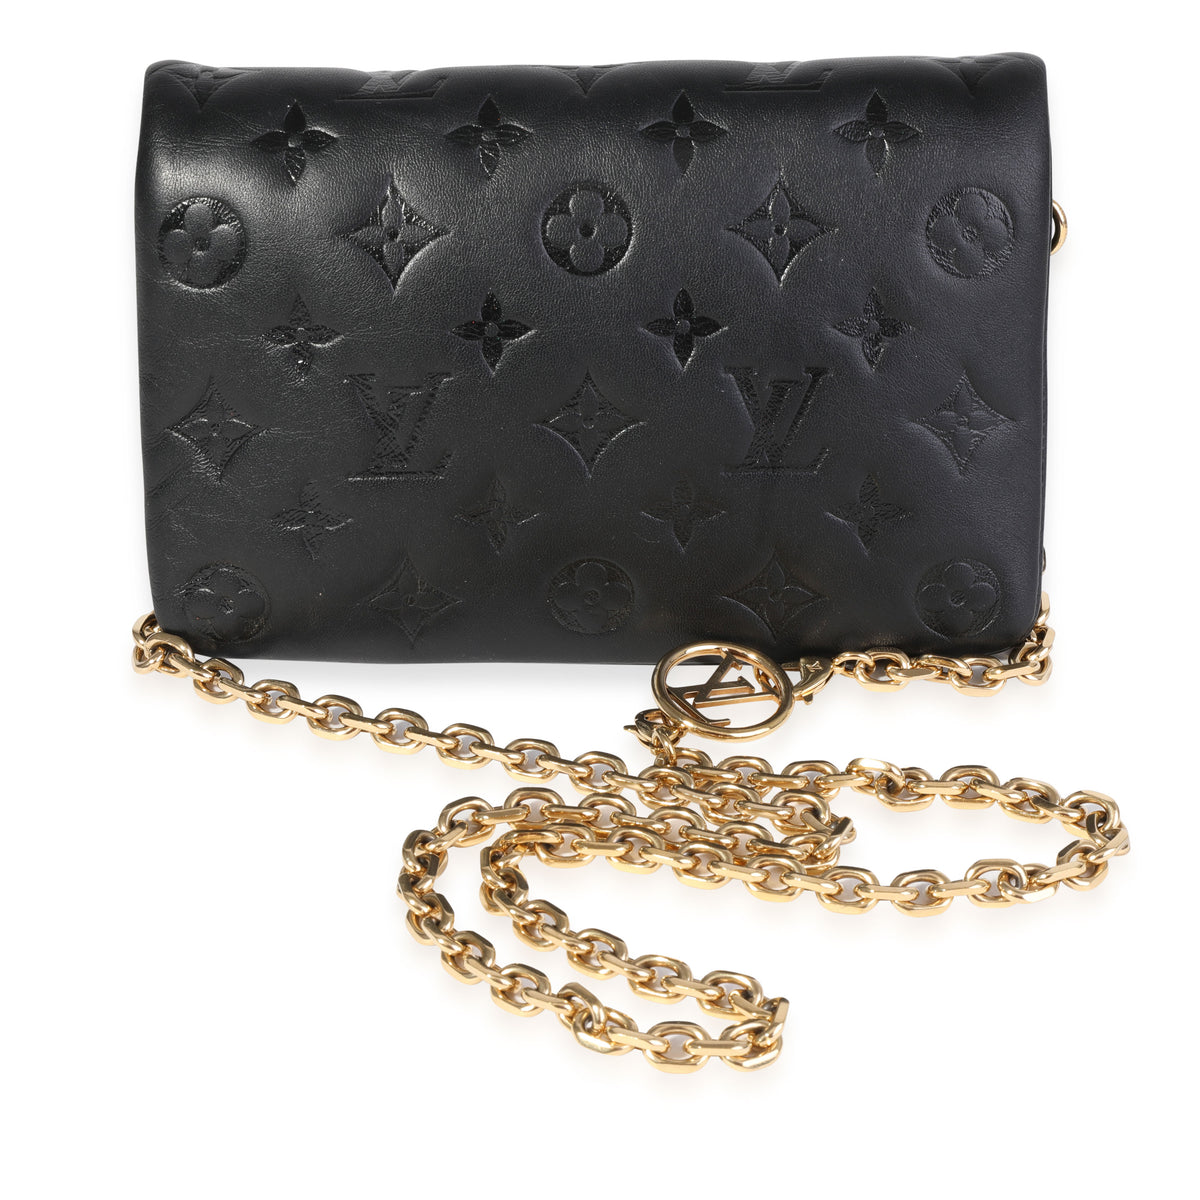 Louis Vuitton Coussin Pochette Black Monogram Embossed Leather Bag New Tag